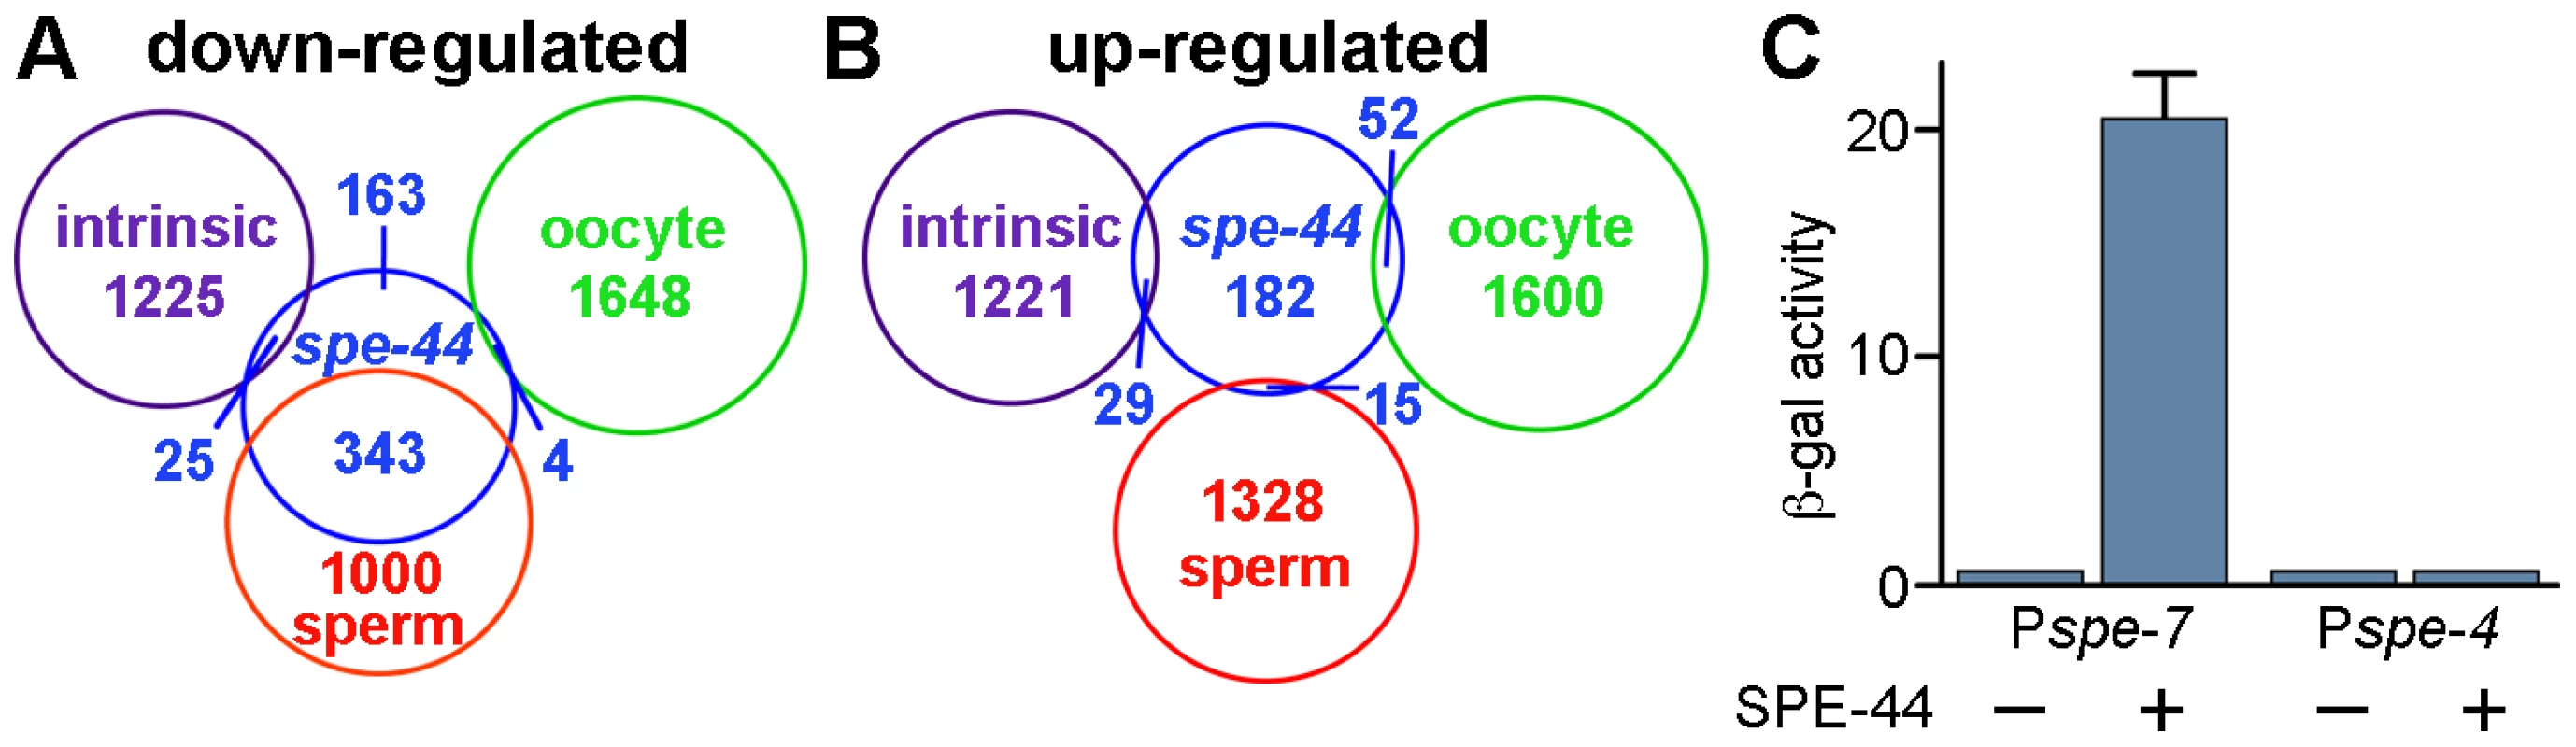 Summary of microarray results and transcriptional activation by SPE-44.